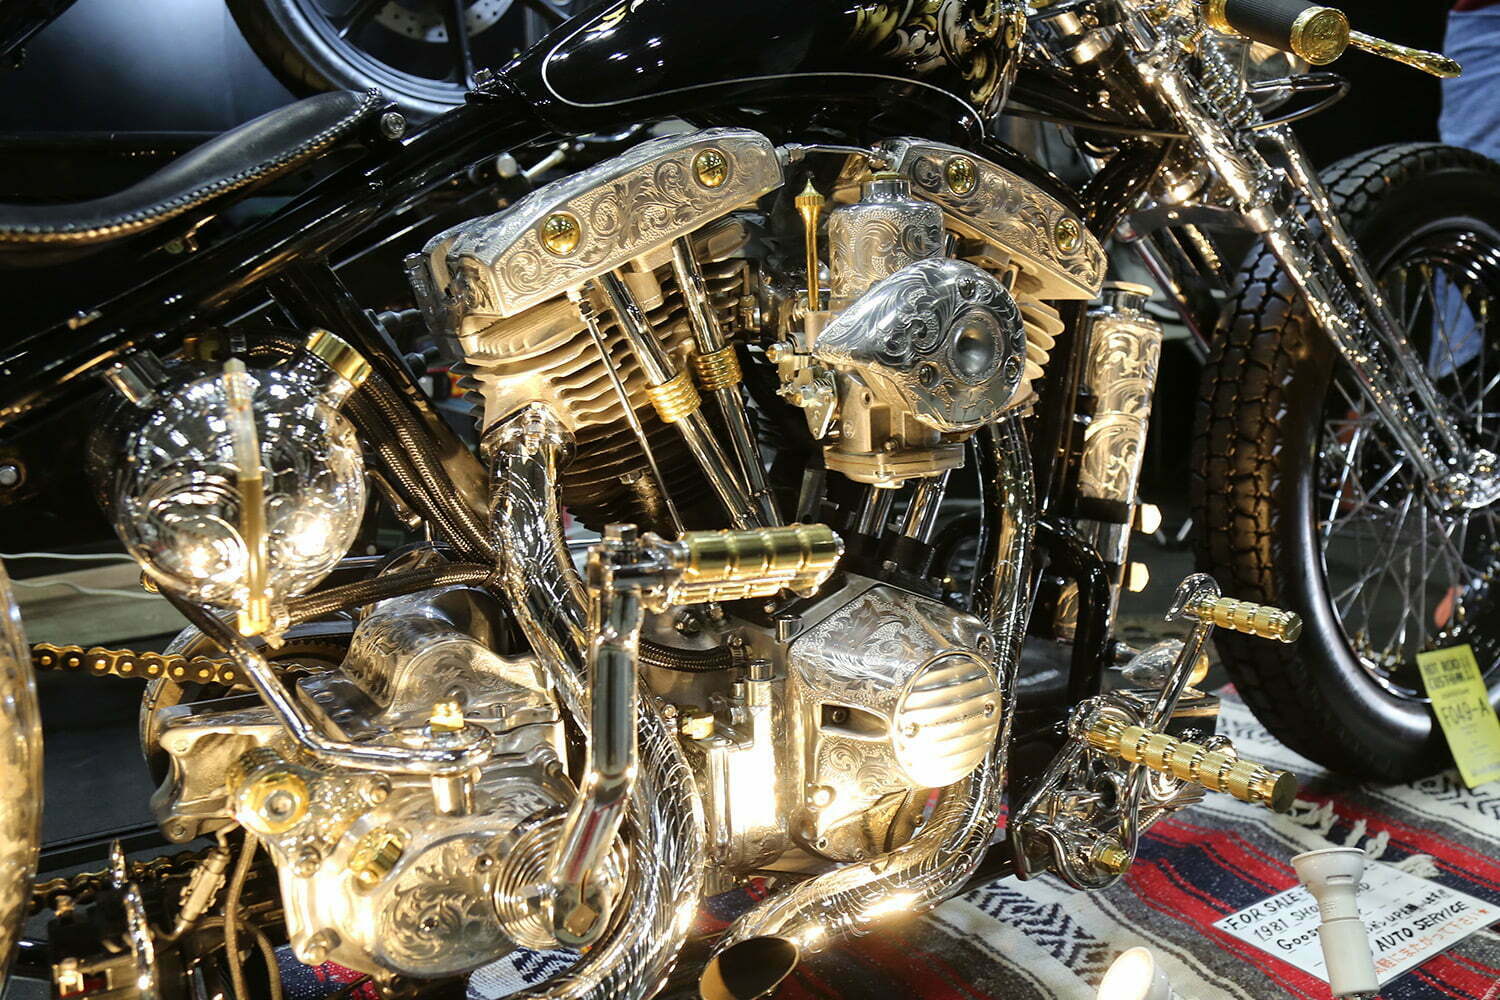 1981 Shovelhead with a hint of engraving